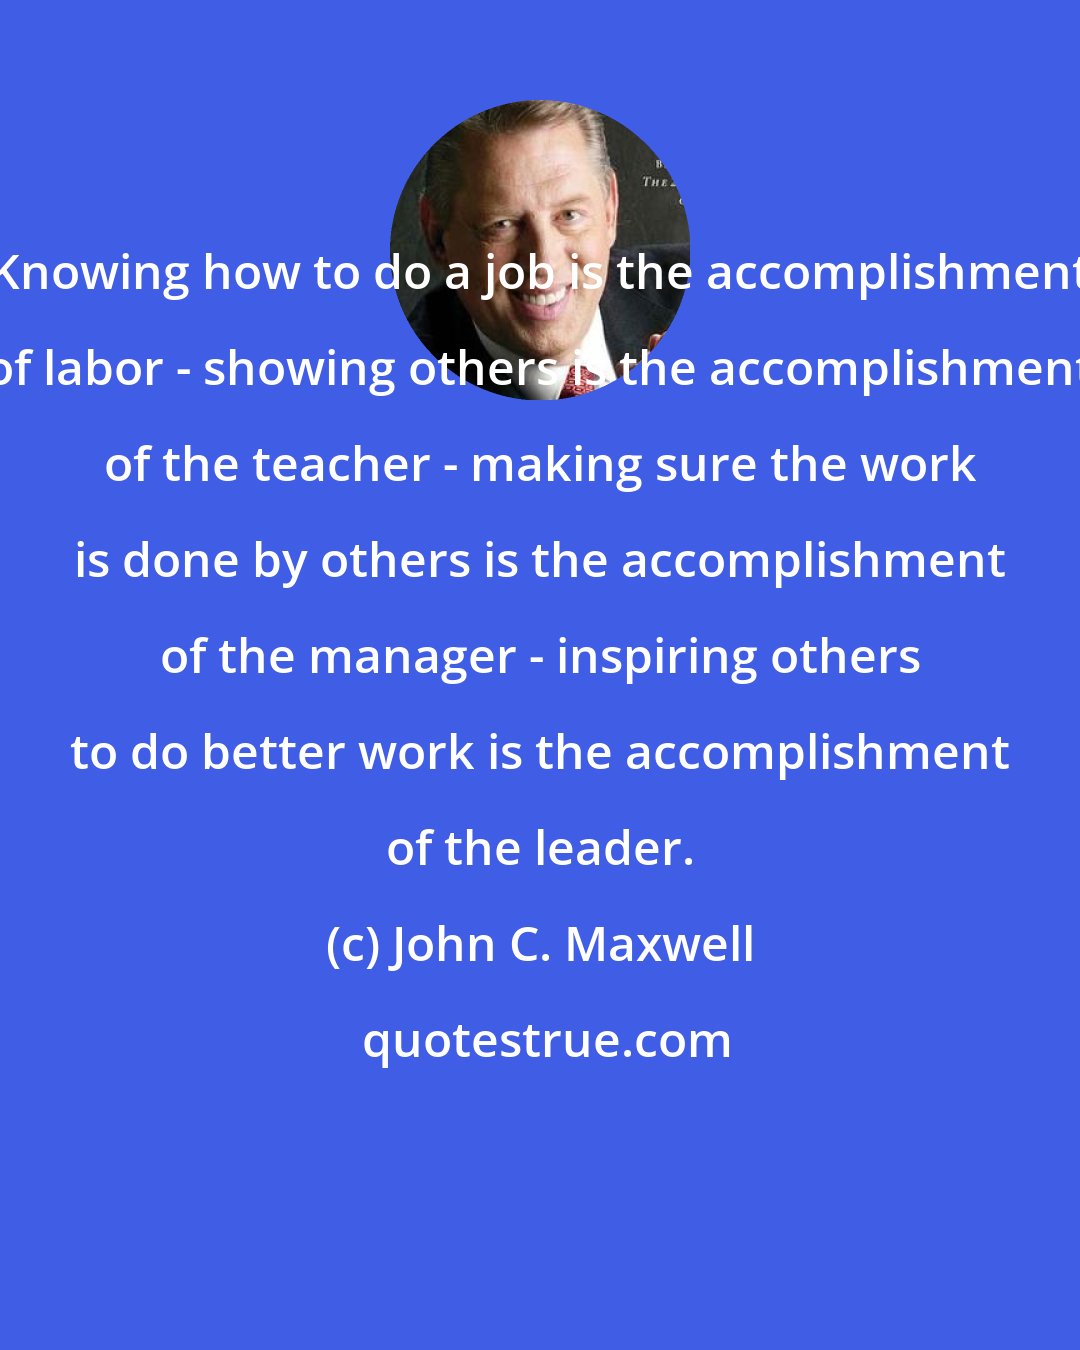 John C. Maxwell: Knowing how to do a job is the accomplishment of labor - showing others is the accomplishment of the teacher - making sure the work is done by others is the accomplishment of the manager - inspiring others to do better work is the accomplishment of the leader.